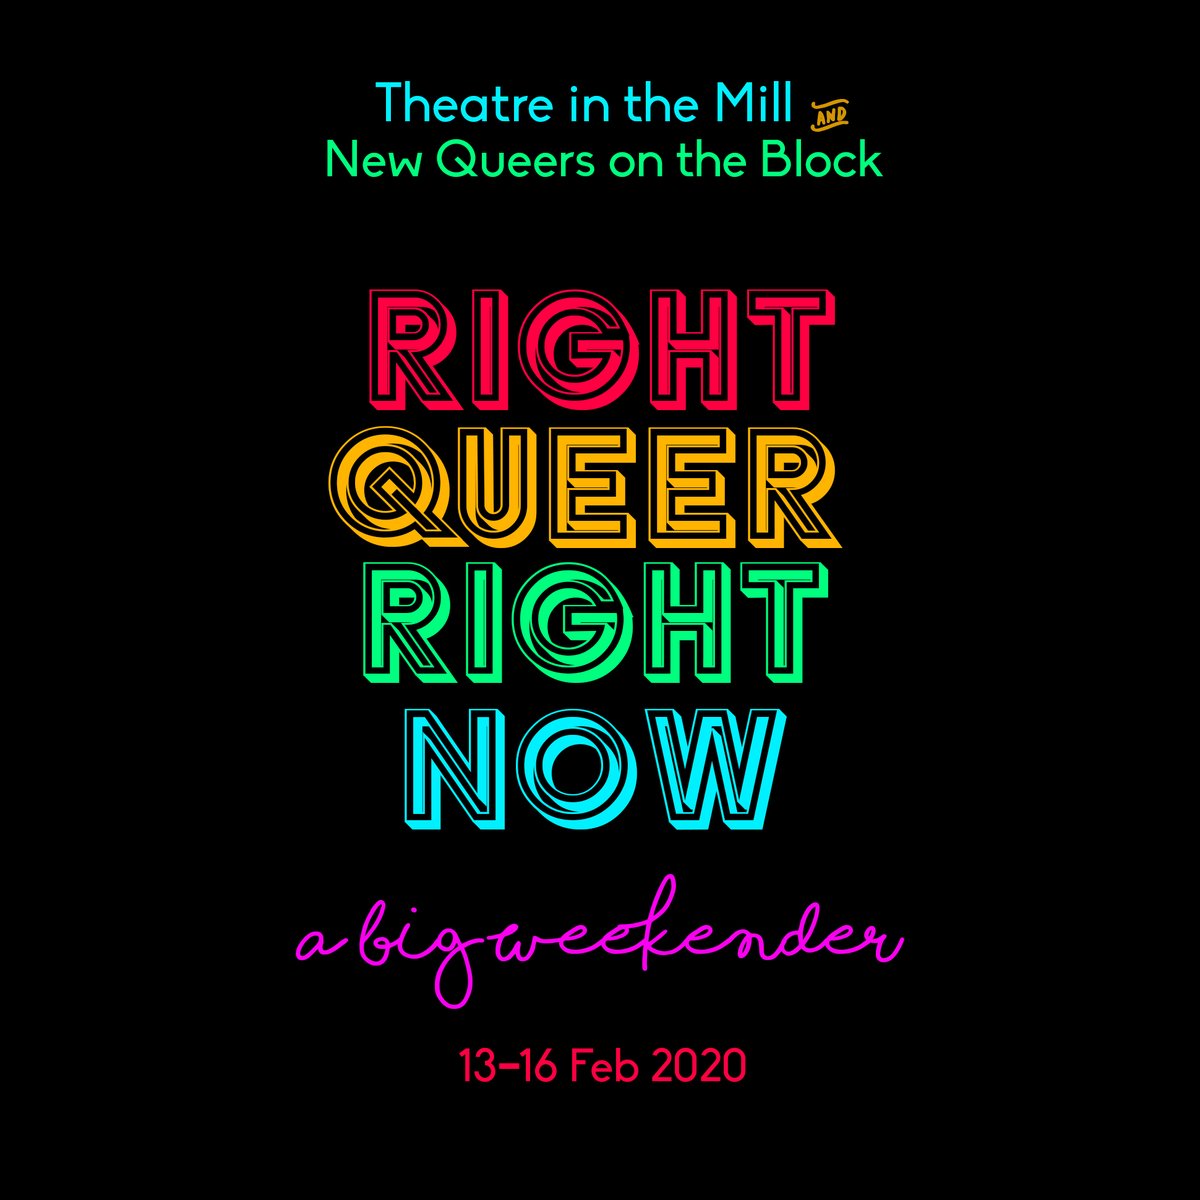 We are so, so proud to be announcing our next Weekender: Right Queer Right Now!

Click here to see the amazing line-up we've got in store for you, in collaboration with @marlboroughbtn's New Queers on the Block: theatreinthemill.com/rightqueerrigh…

#RightQueer